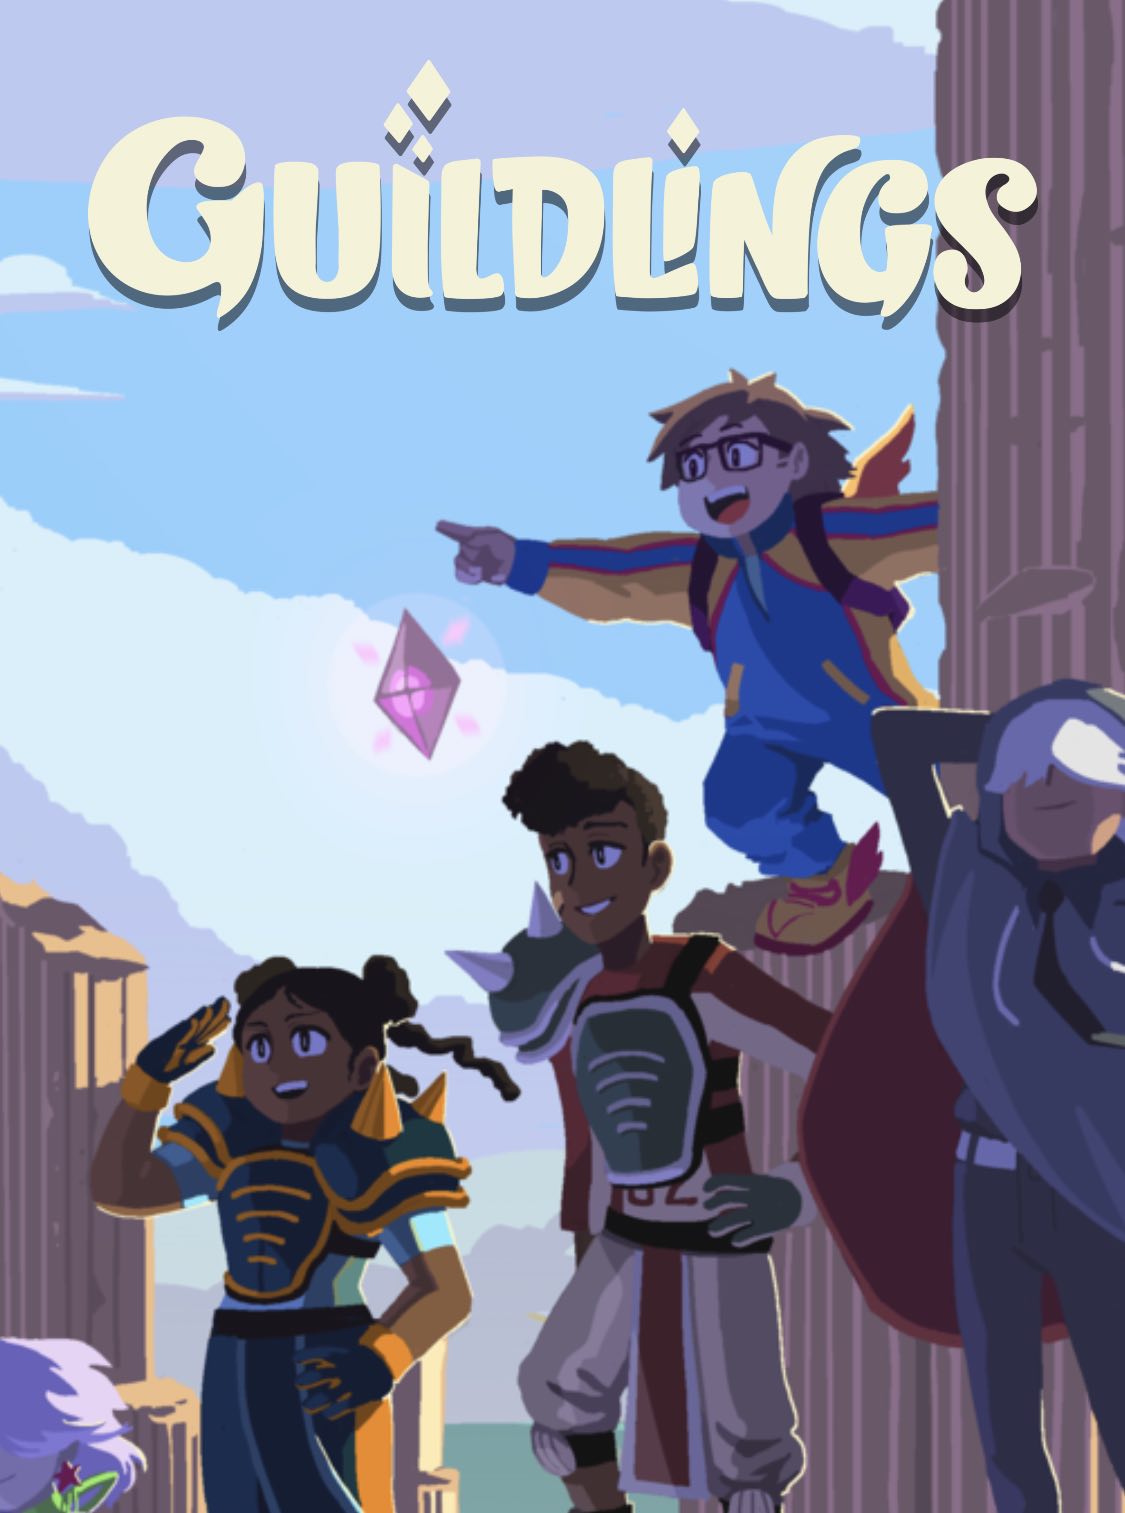 Four characters are pictured among ruins with the Guildlings title above them.